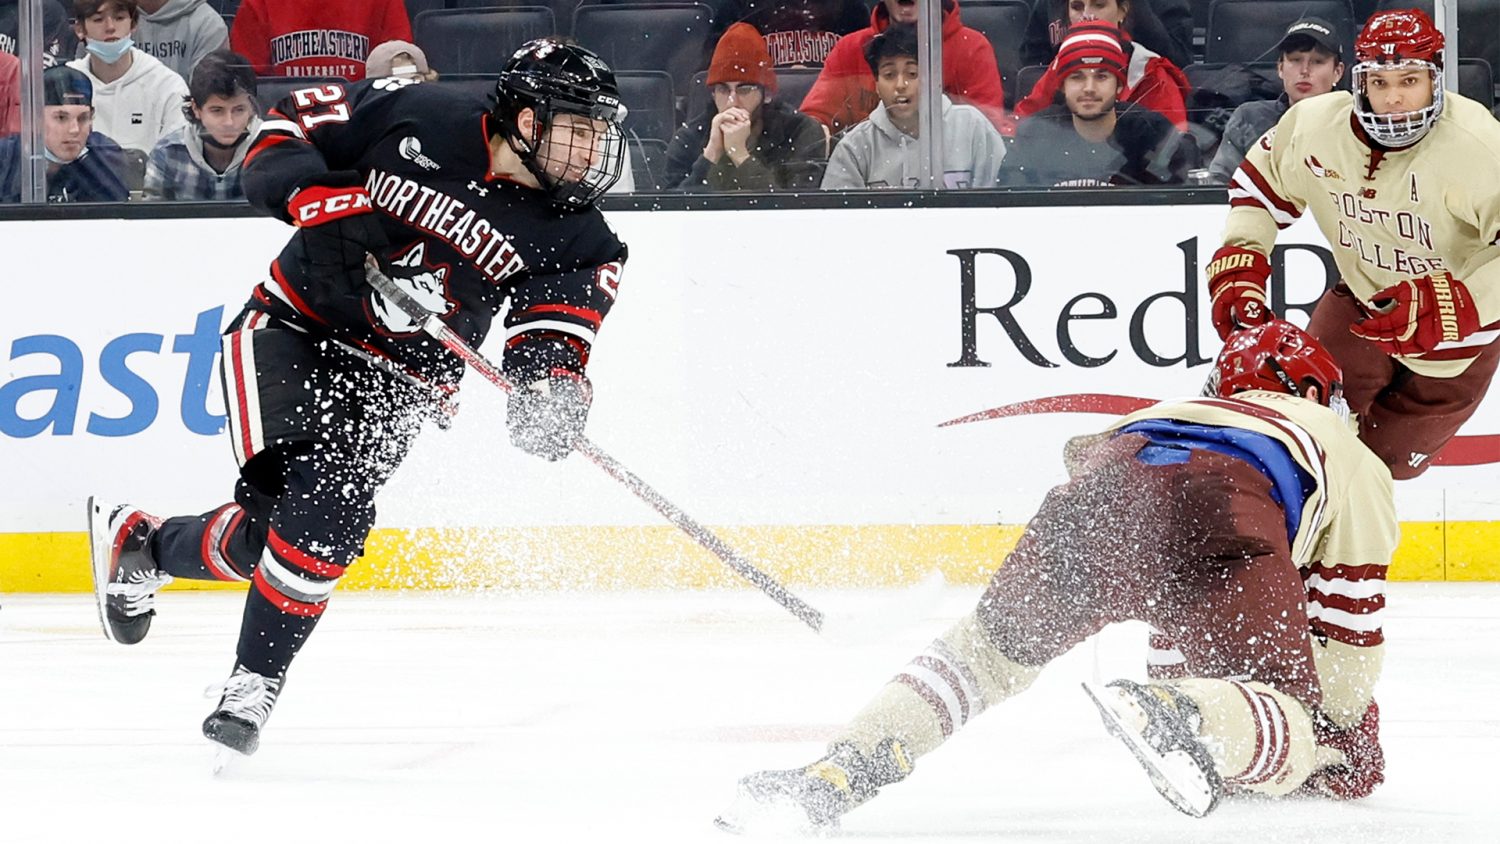 BU Men's Hockey on X: Today we're welcoming forward Jack Hughes to our  program! A second-round draft pick of the LA Kings, Jack joins us after  spending two seasons at Northeastern, where